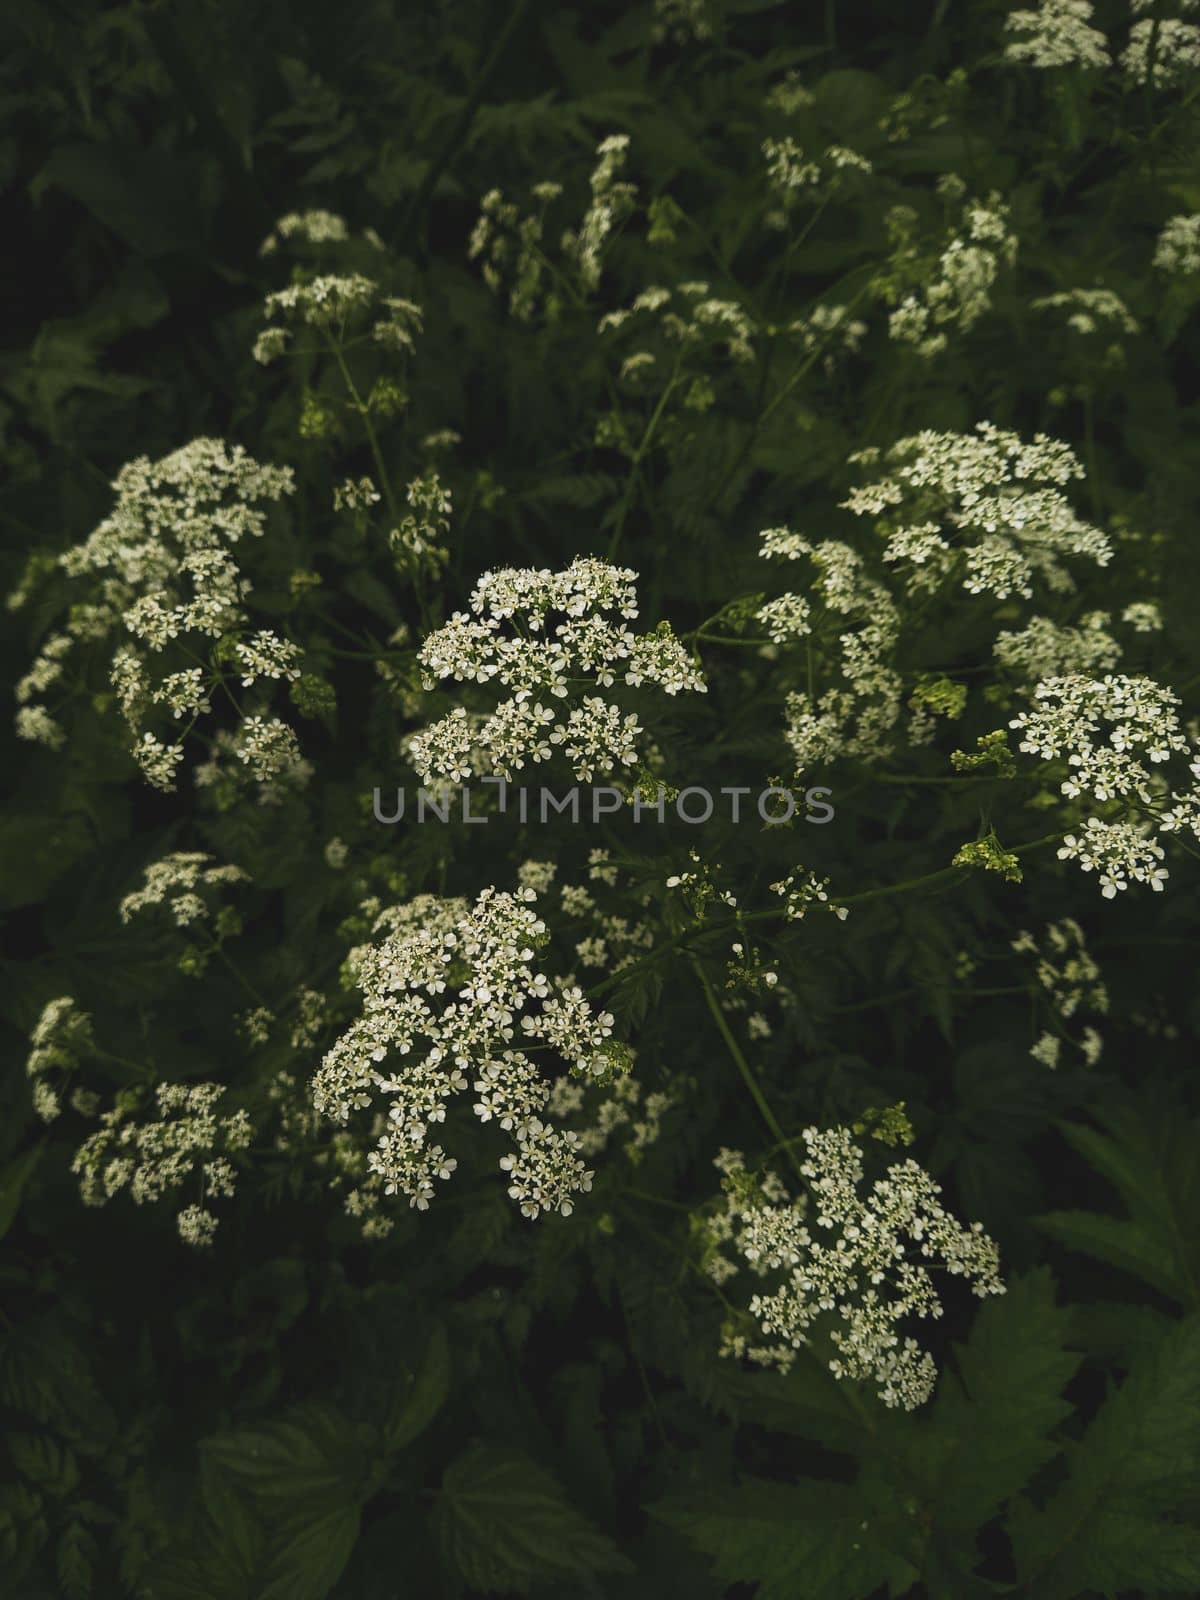 Green Hemlock flowers and leaves nature background. Nature hemlock background. Green hemlock foliage texture, leaf nature background. High quality photo